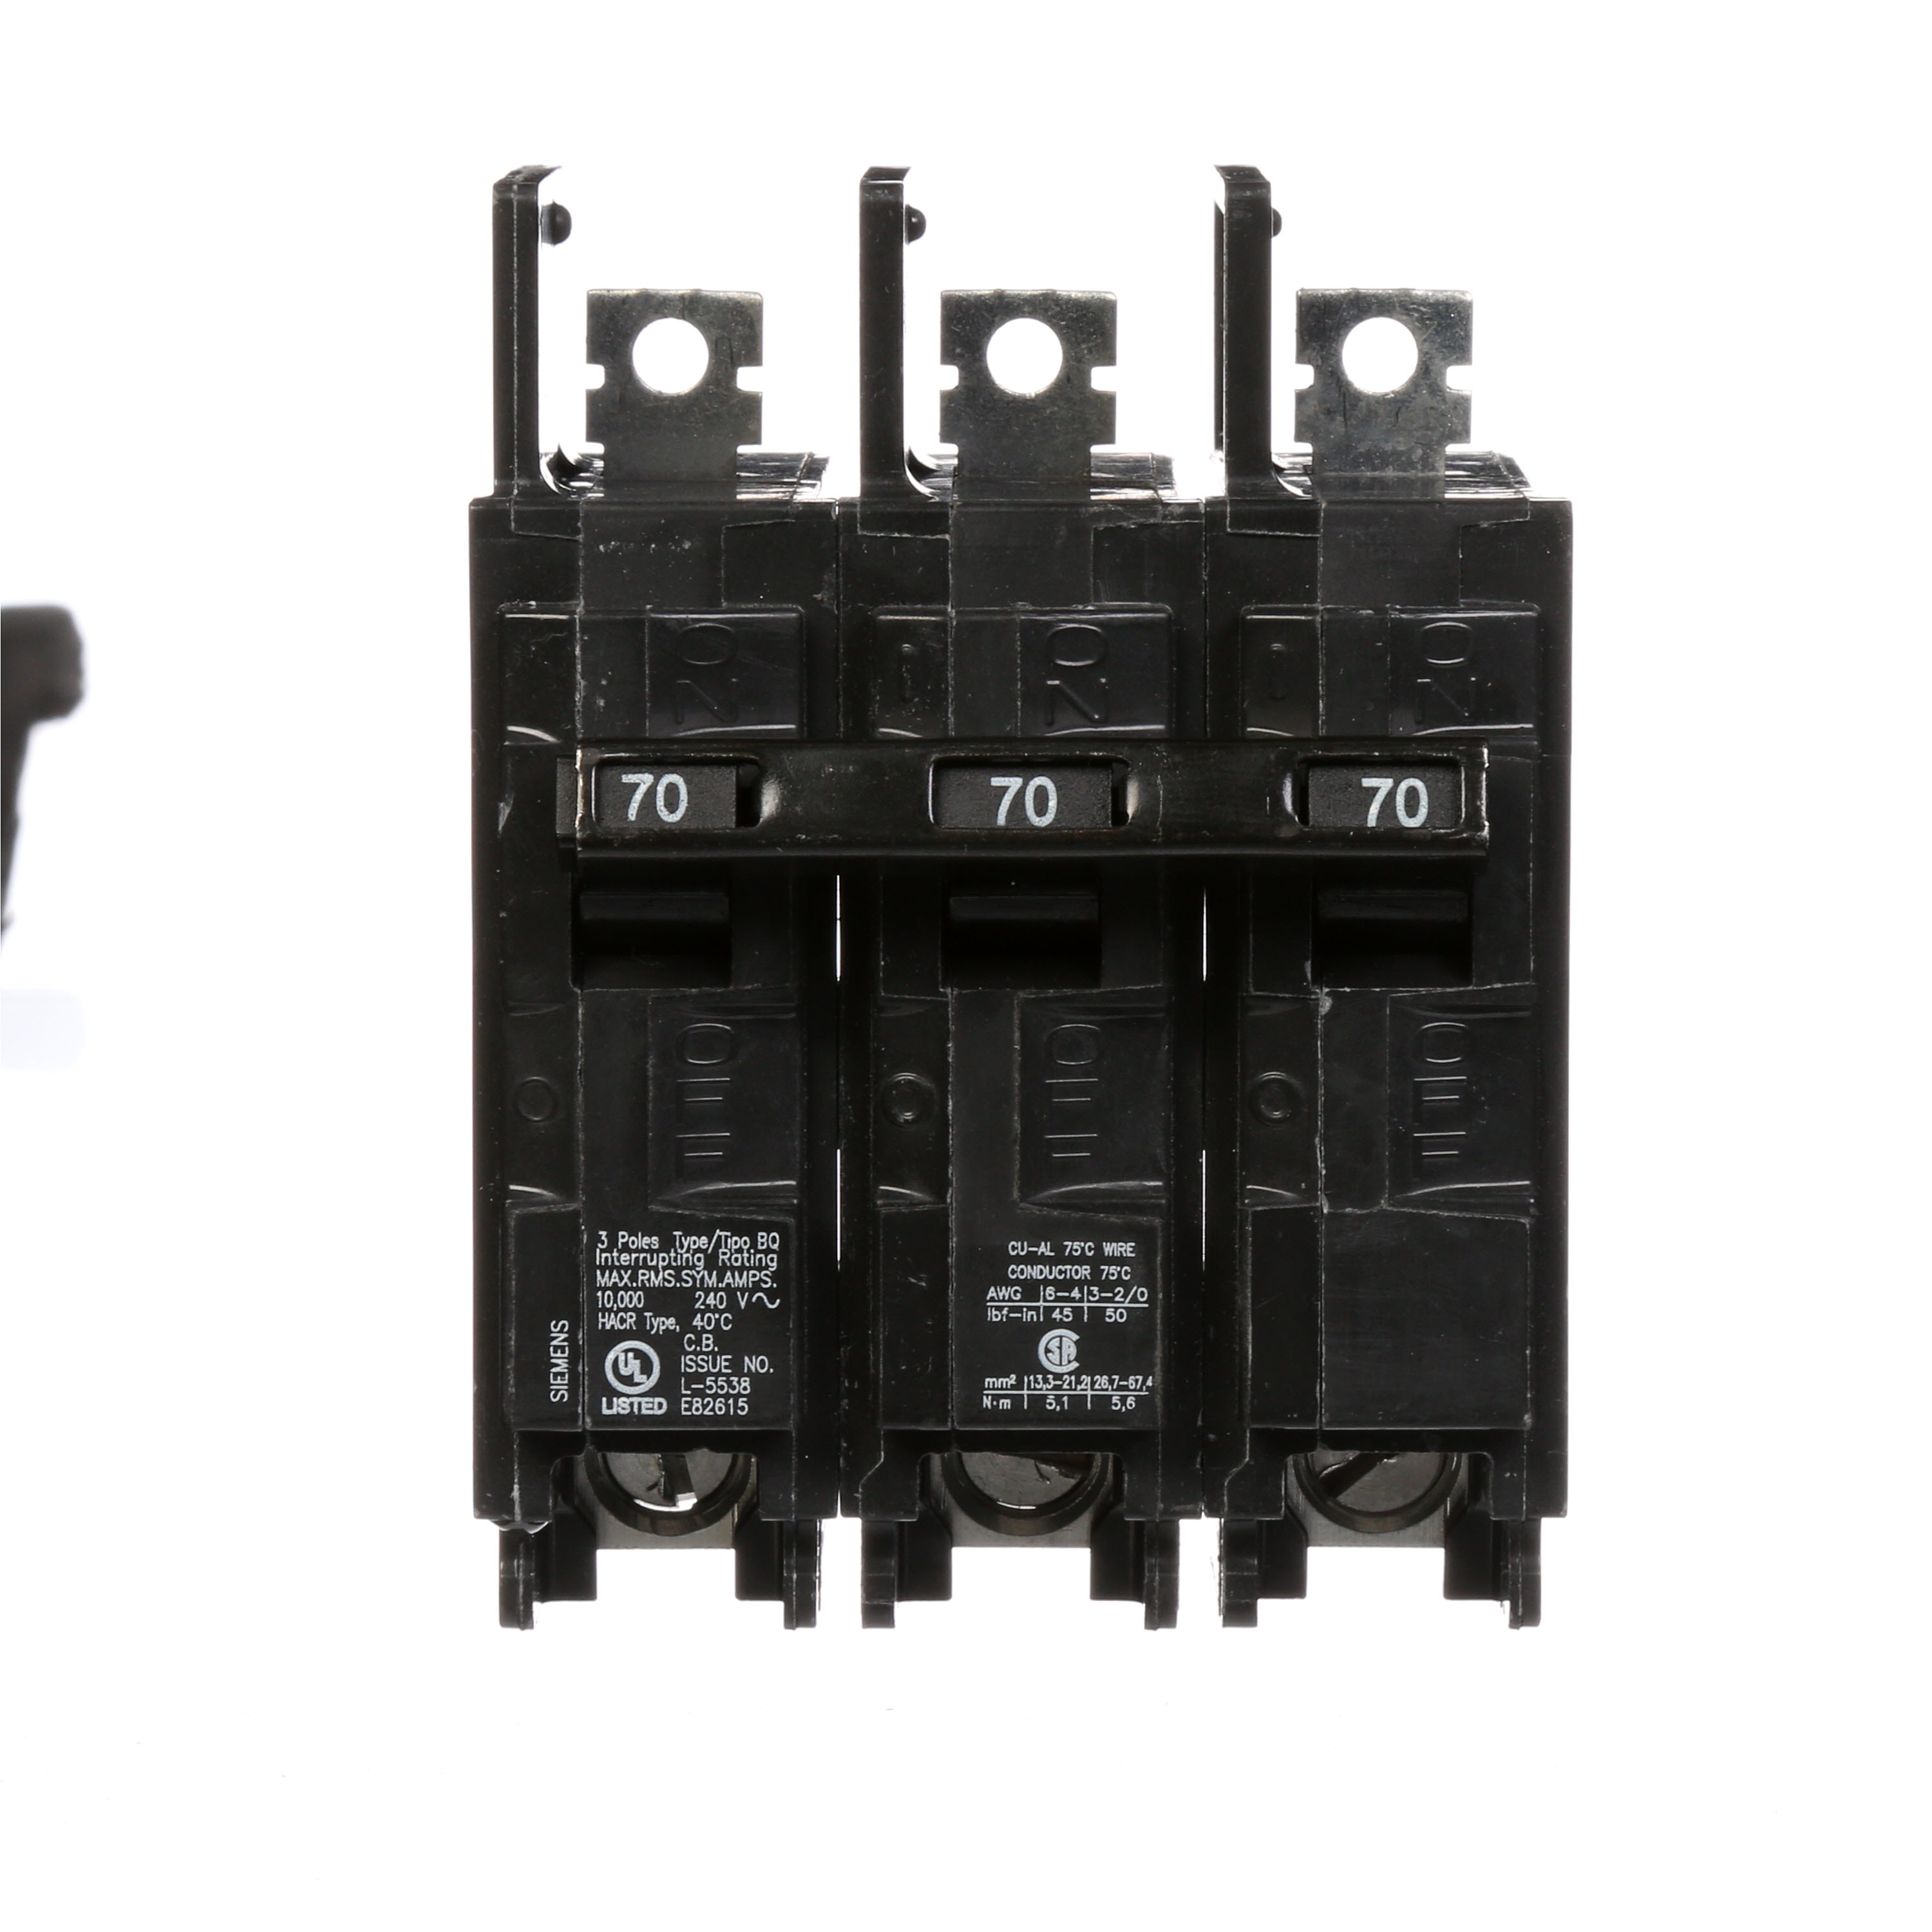 Siemens Low Voltage Molded Case Circuit Breakers General Purpose MCCBs are Circuit Protection Molded Case Circuit Breakers. 3-Pole Common-Trip circuit breaker type BQ. Rated 240V (070A) (AIR 10 kA). Special features Load side lugs are included.